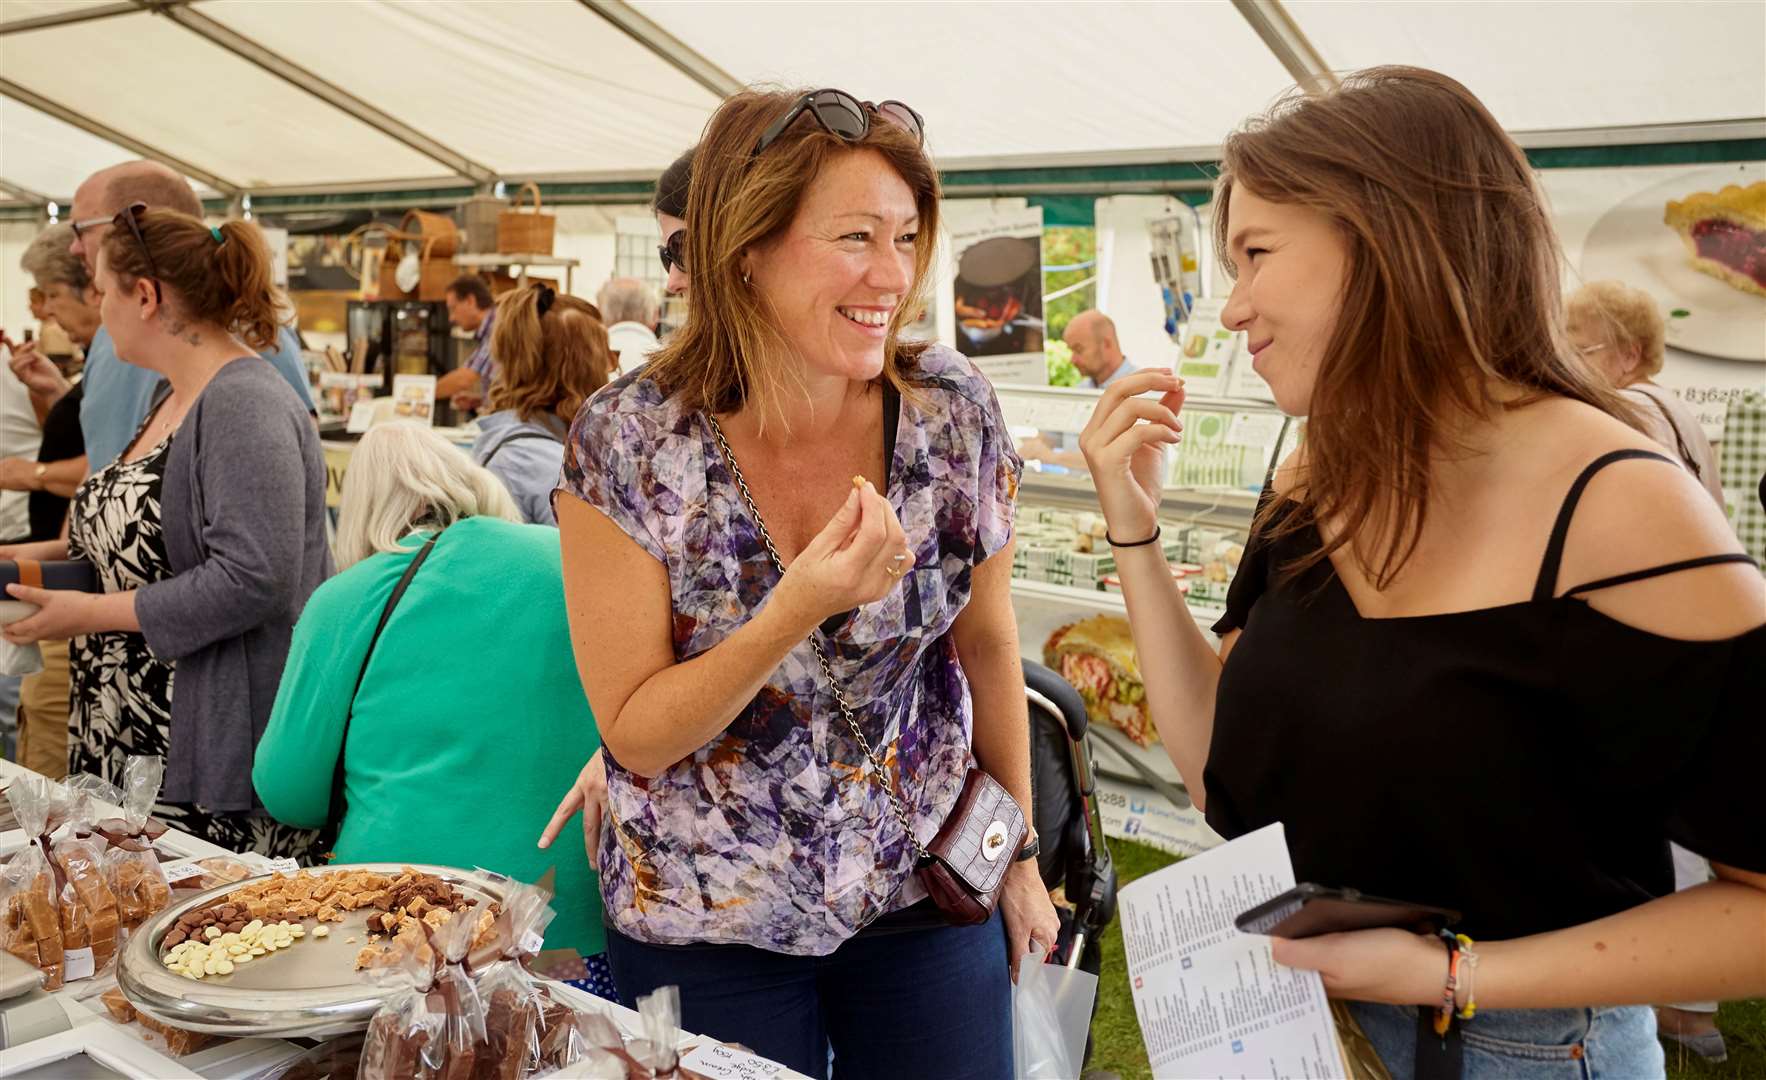 Enjoy tasty baked goods, fresh local produce and delicious drinks at the country show. Picture: Supplied by One Voice Media